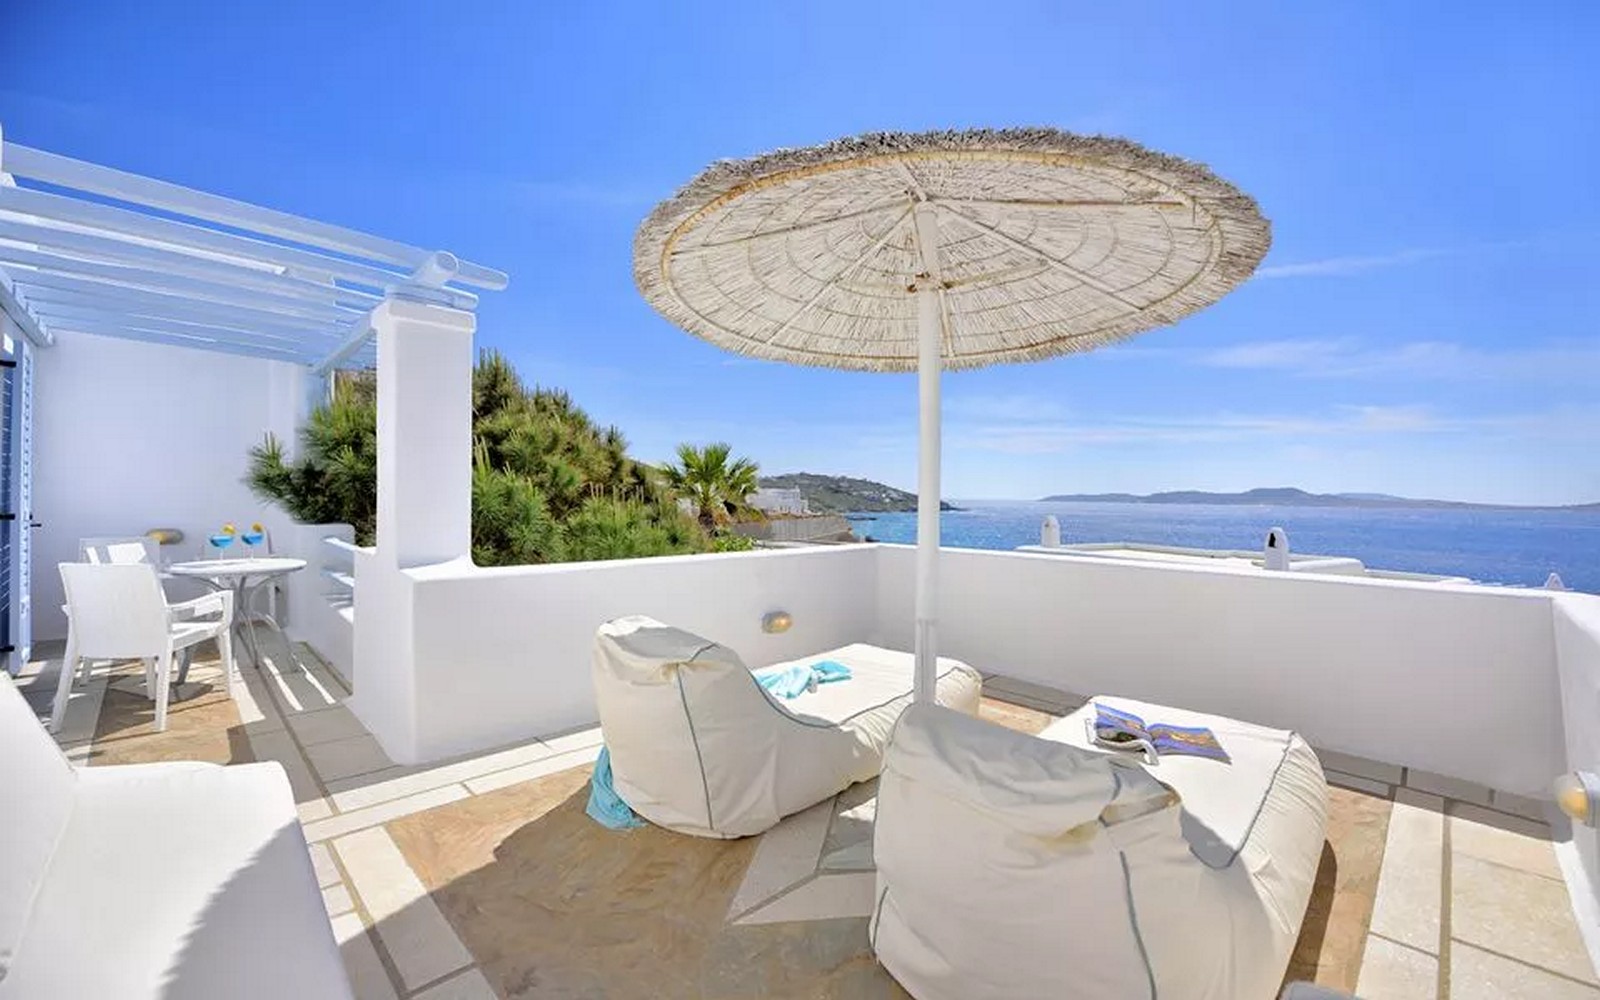 A sea view from a Mykonian private villa